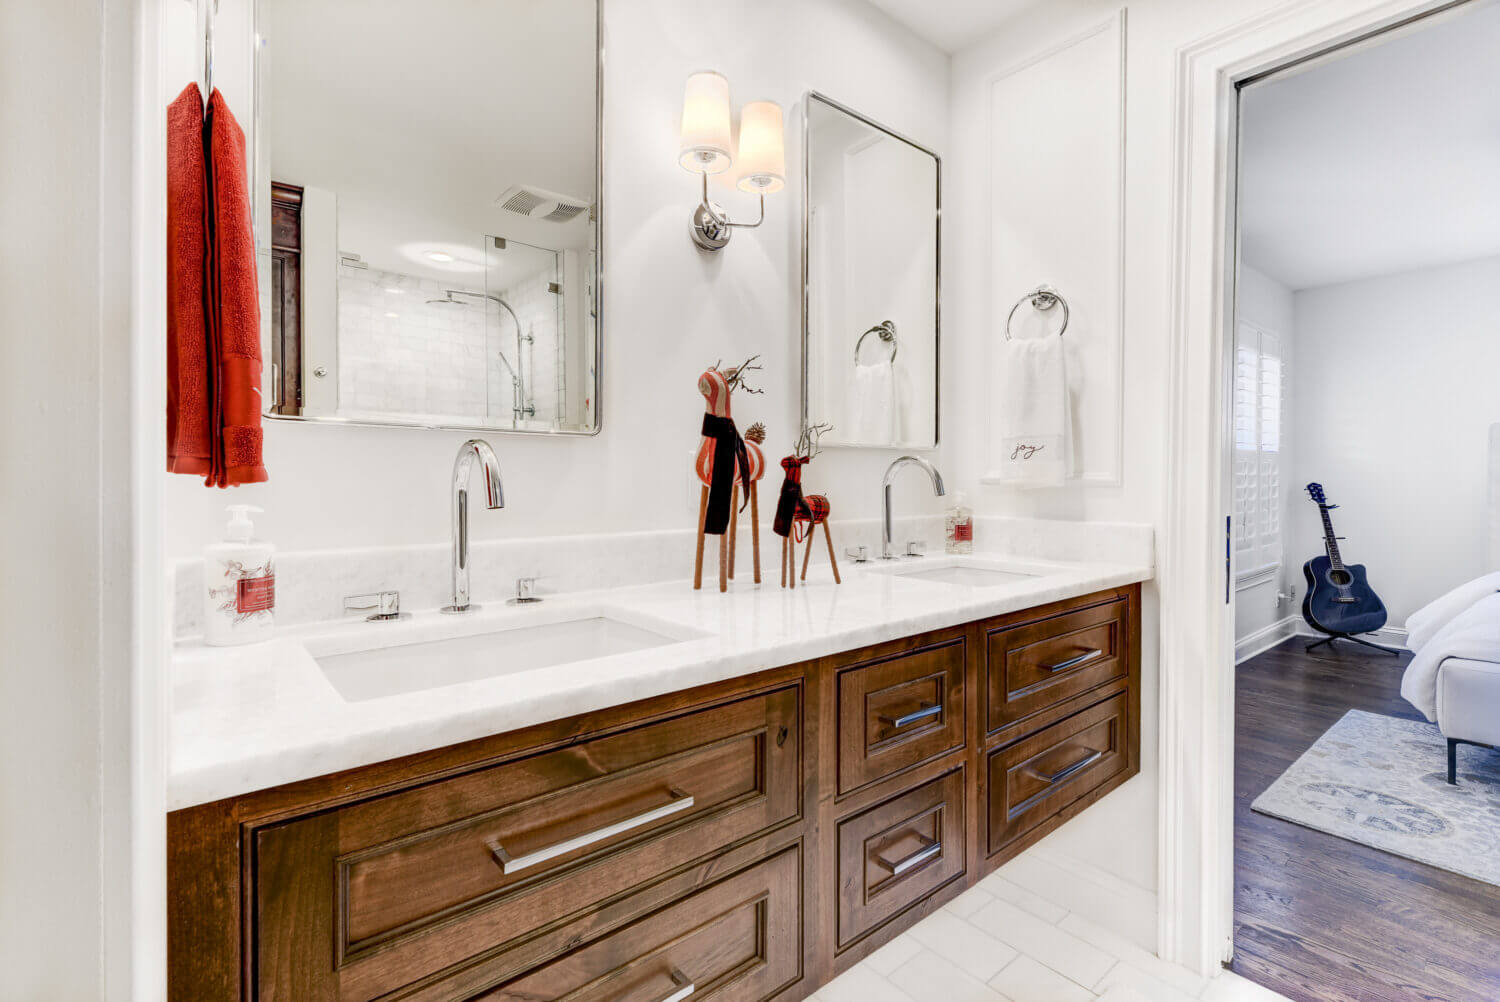 A warm, knotty alder floating bath vanity with inset cabinet doors in a remodeled master bathroom. This bath is decorated with festive red, reindeer holiday decor.